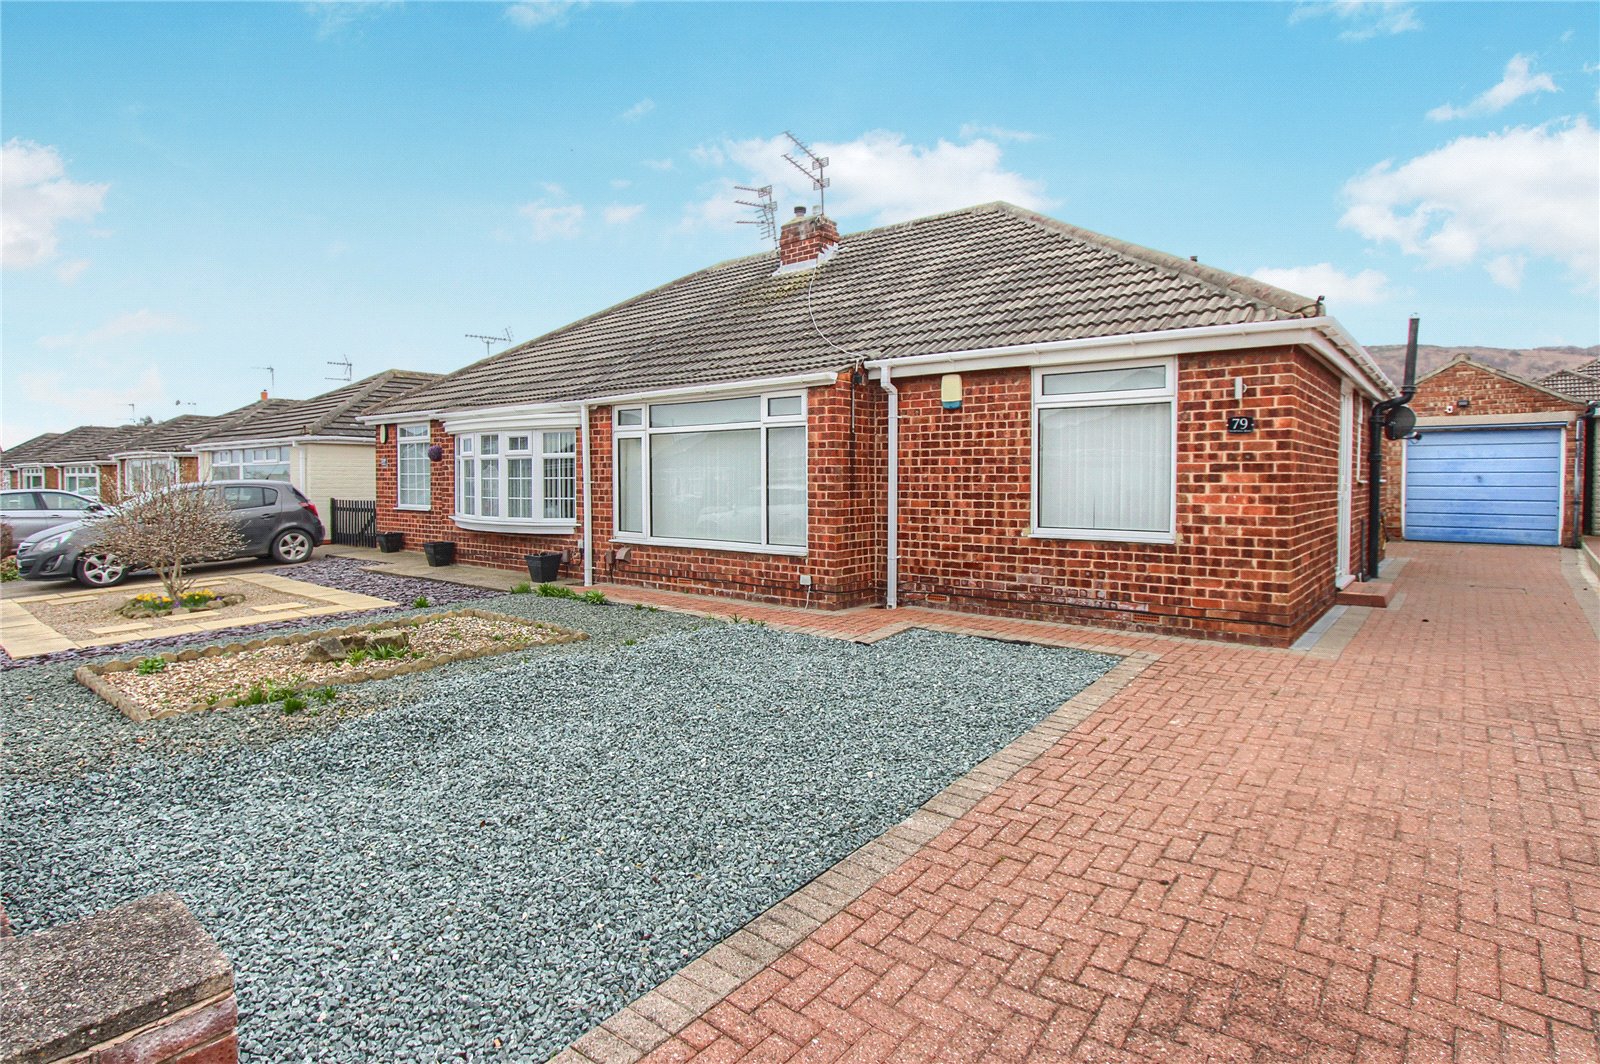 2 bed bungalow for sale in Churchill Road, Eston - Property Image 1